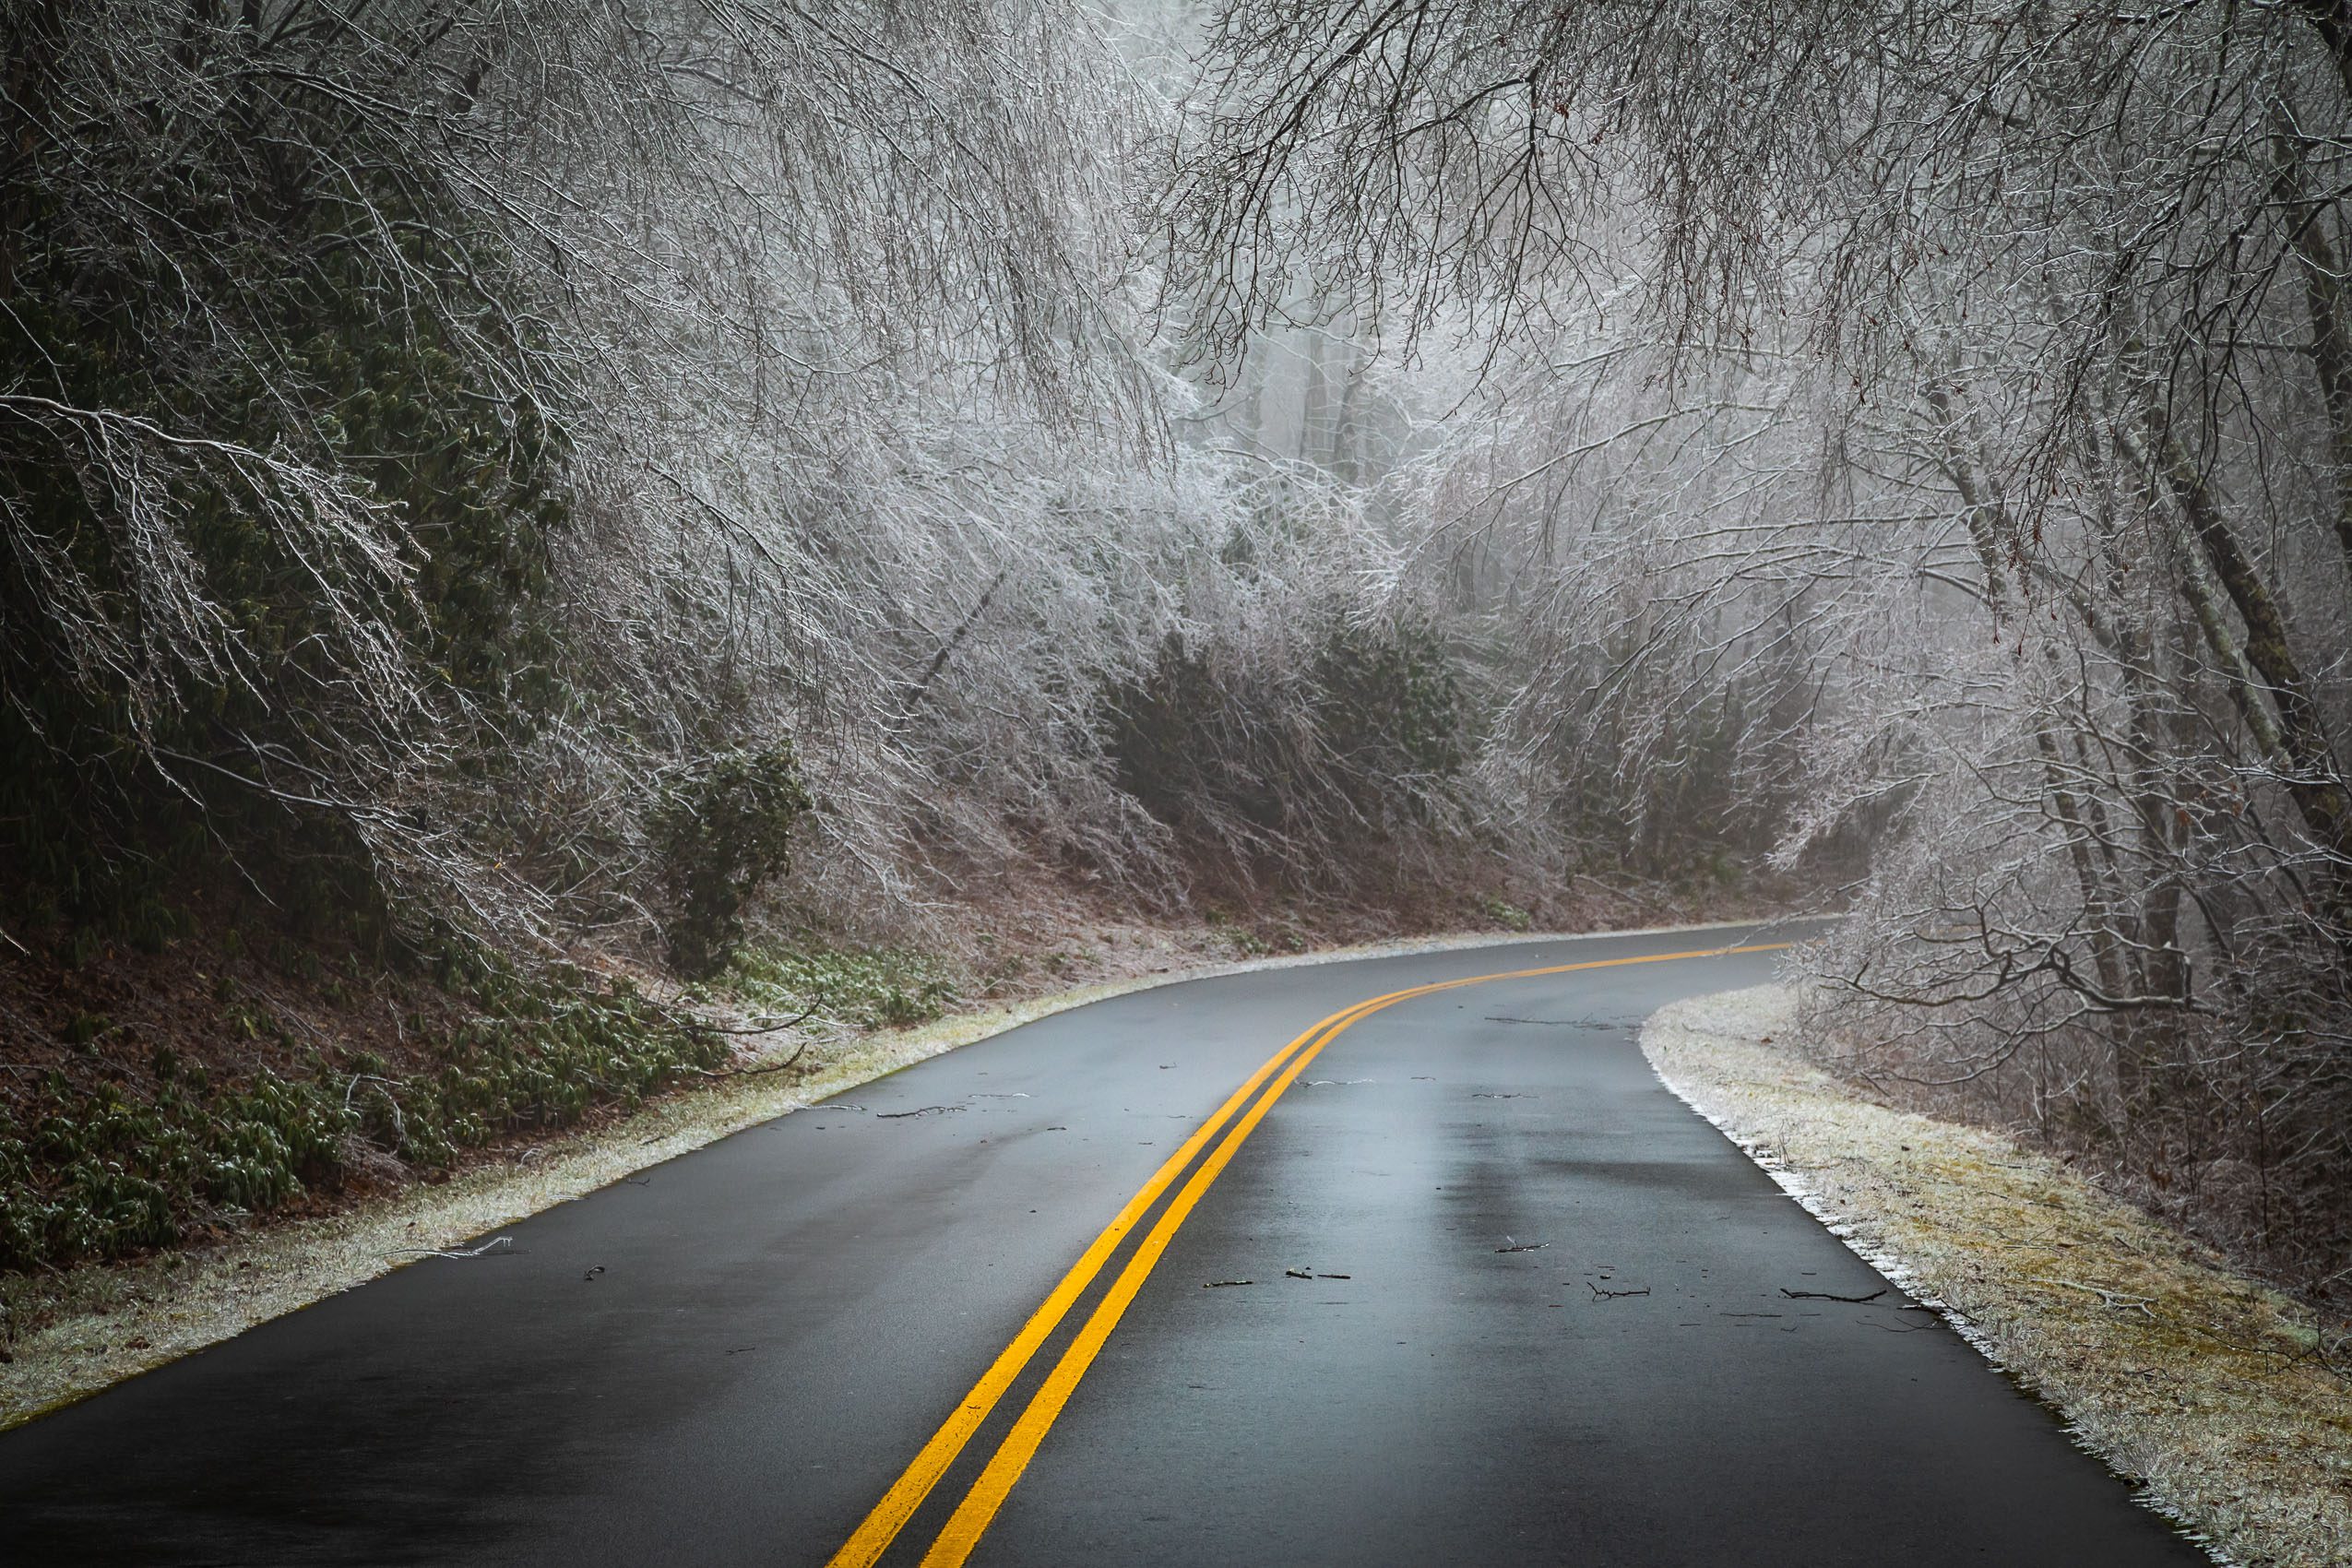 The Blue Ridge Parkway near Spruce Pine in North Carolina, after an ice storm. NC020